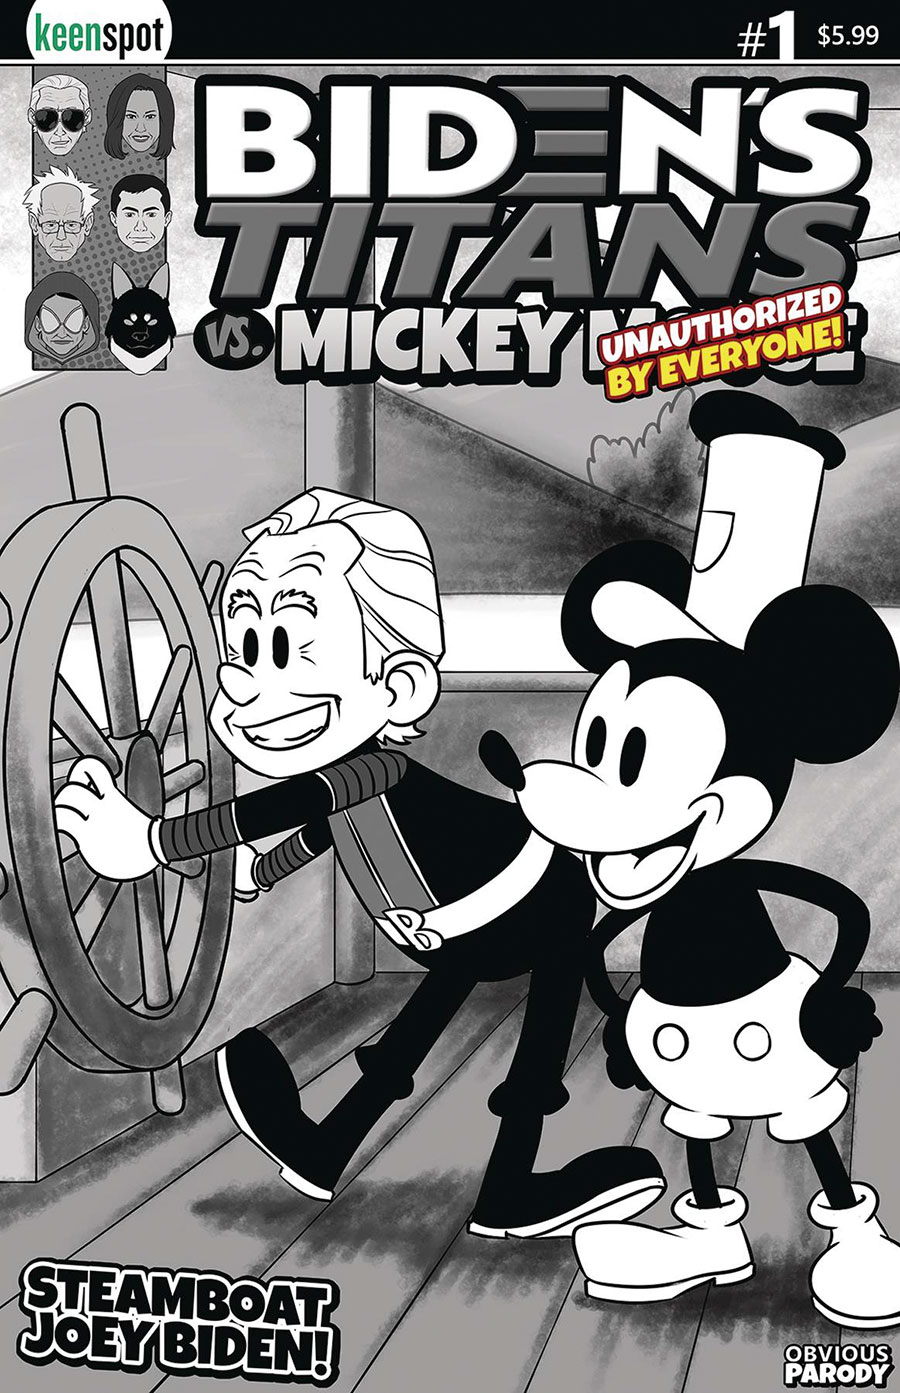 Bidens Titans vs Mickey Mouse (Unauthorized) #1 Cover B Variant Steamboat Joey Cover